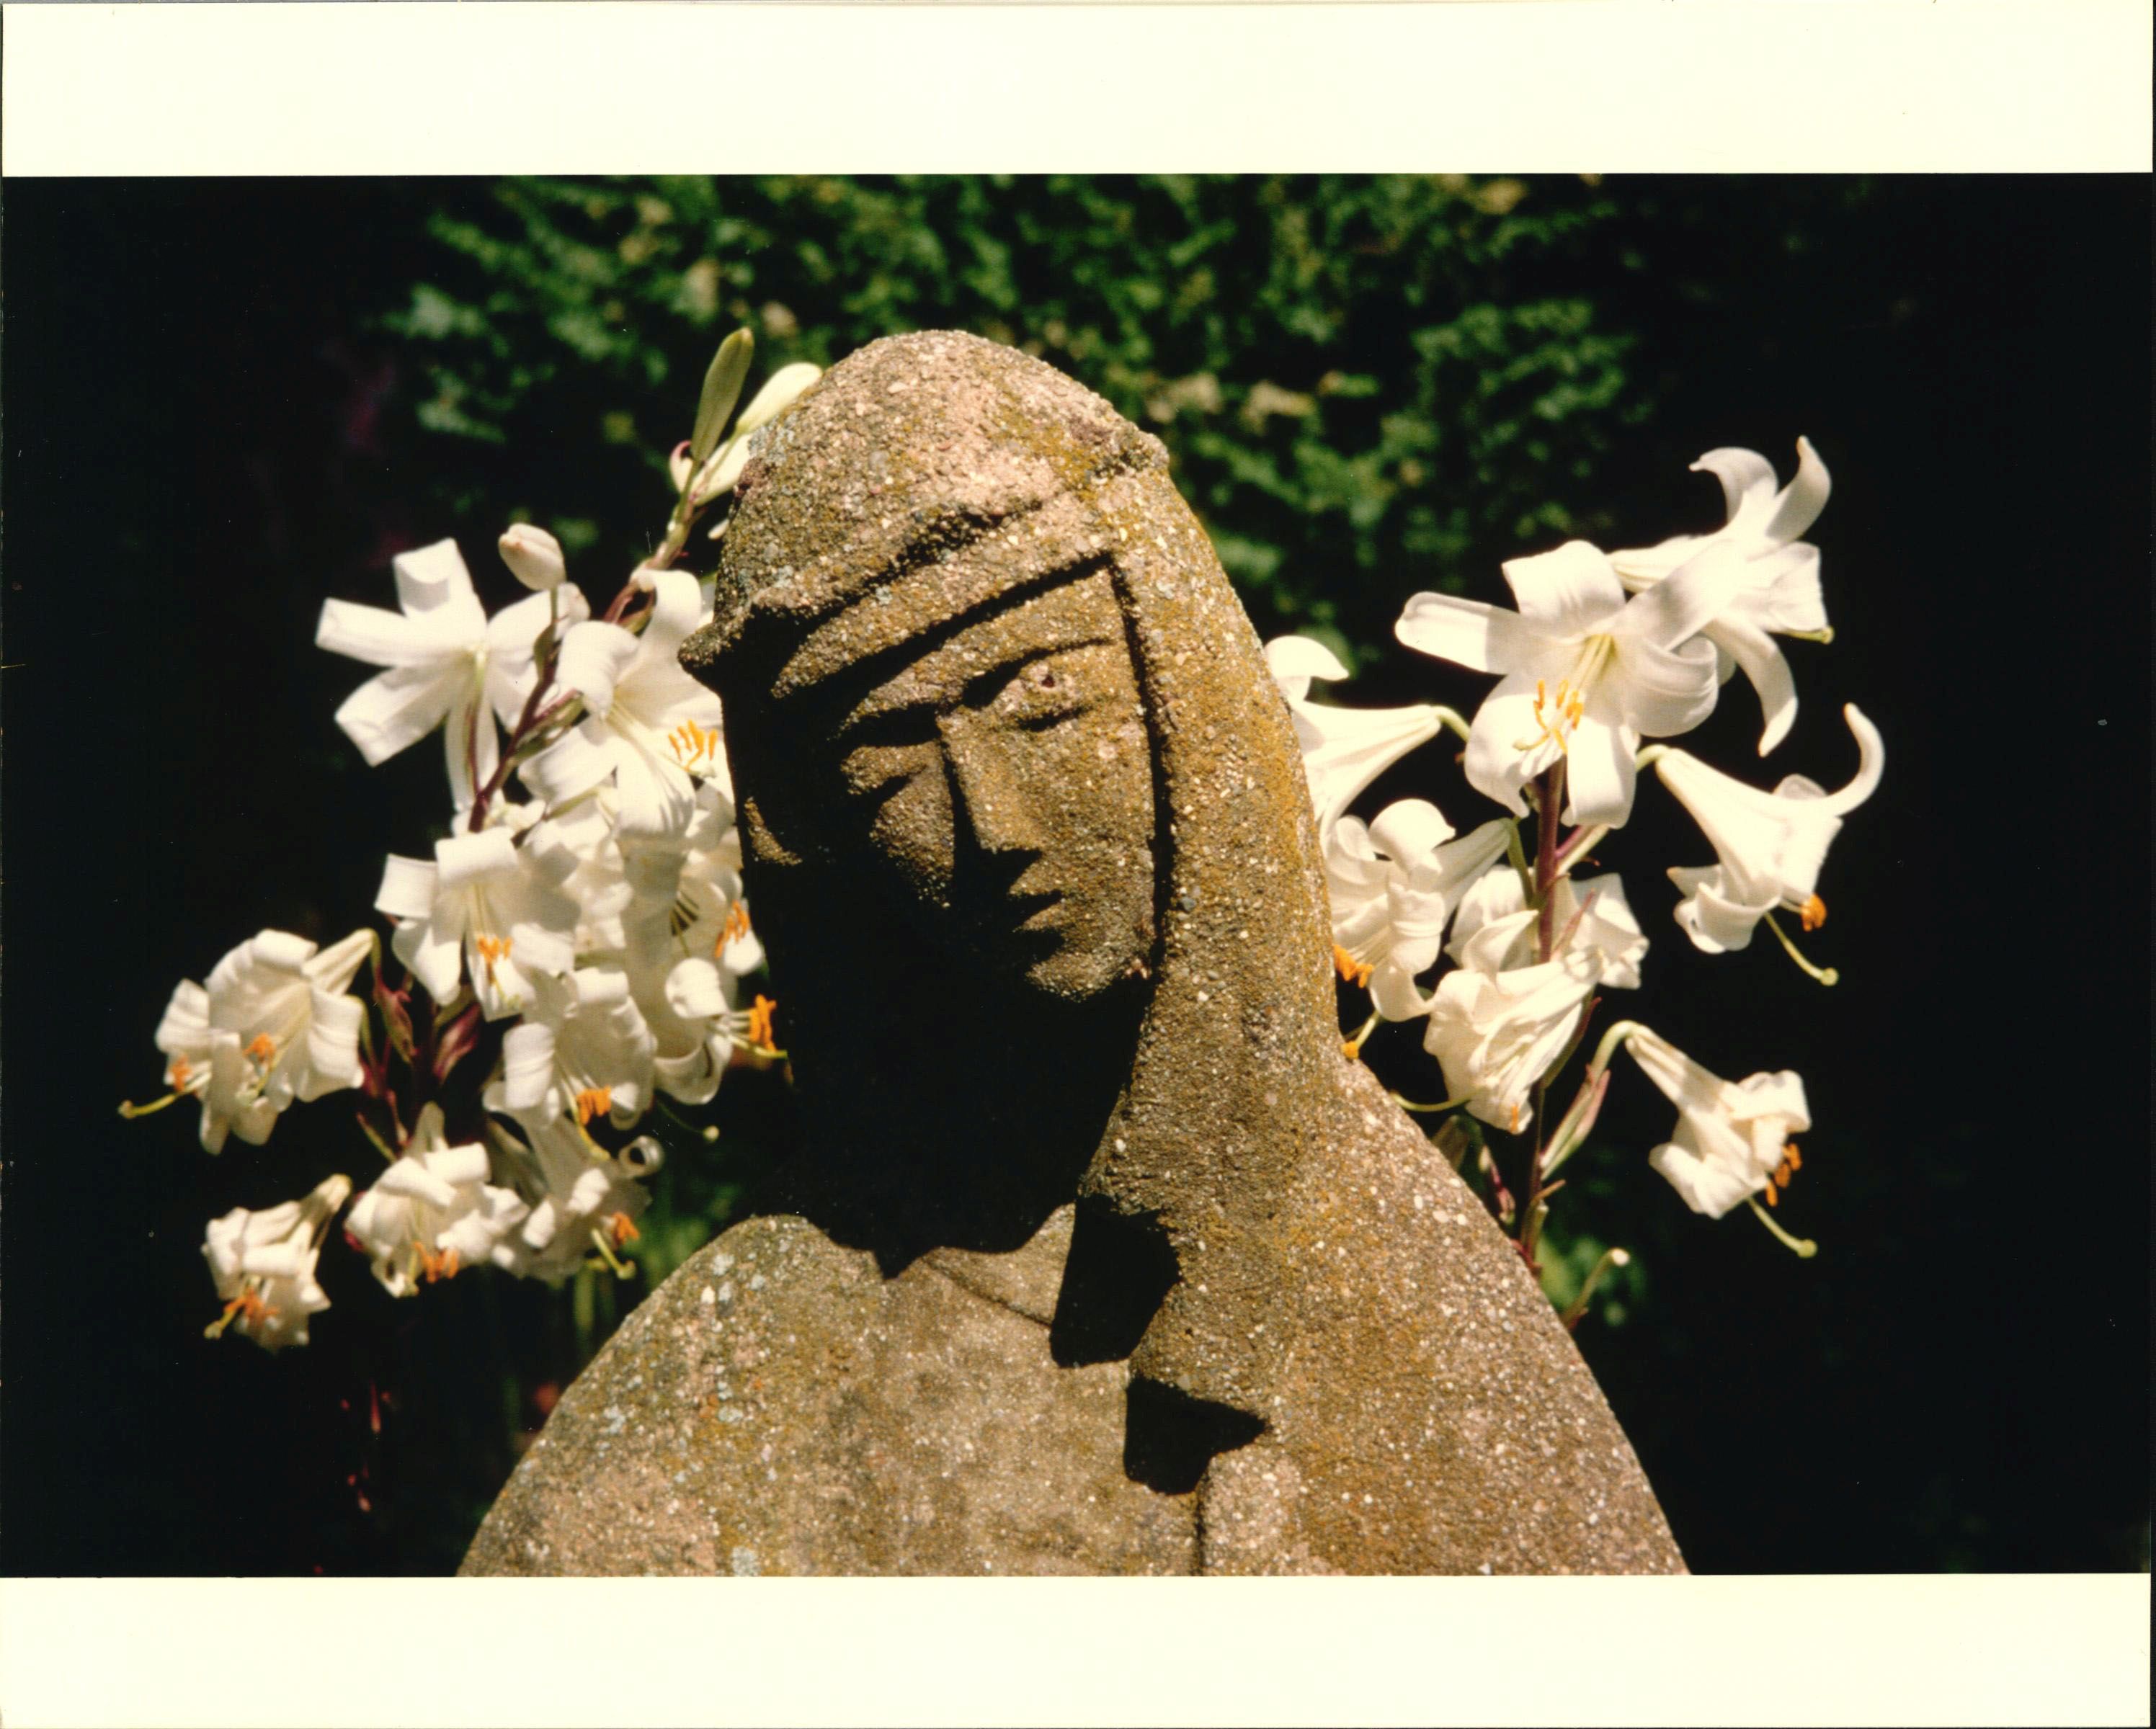 ?Garden Paradise of Our Lady.? Photograph from the John Stokes and Mary?s Garden collection, Marian Library. c. 1982 